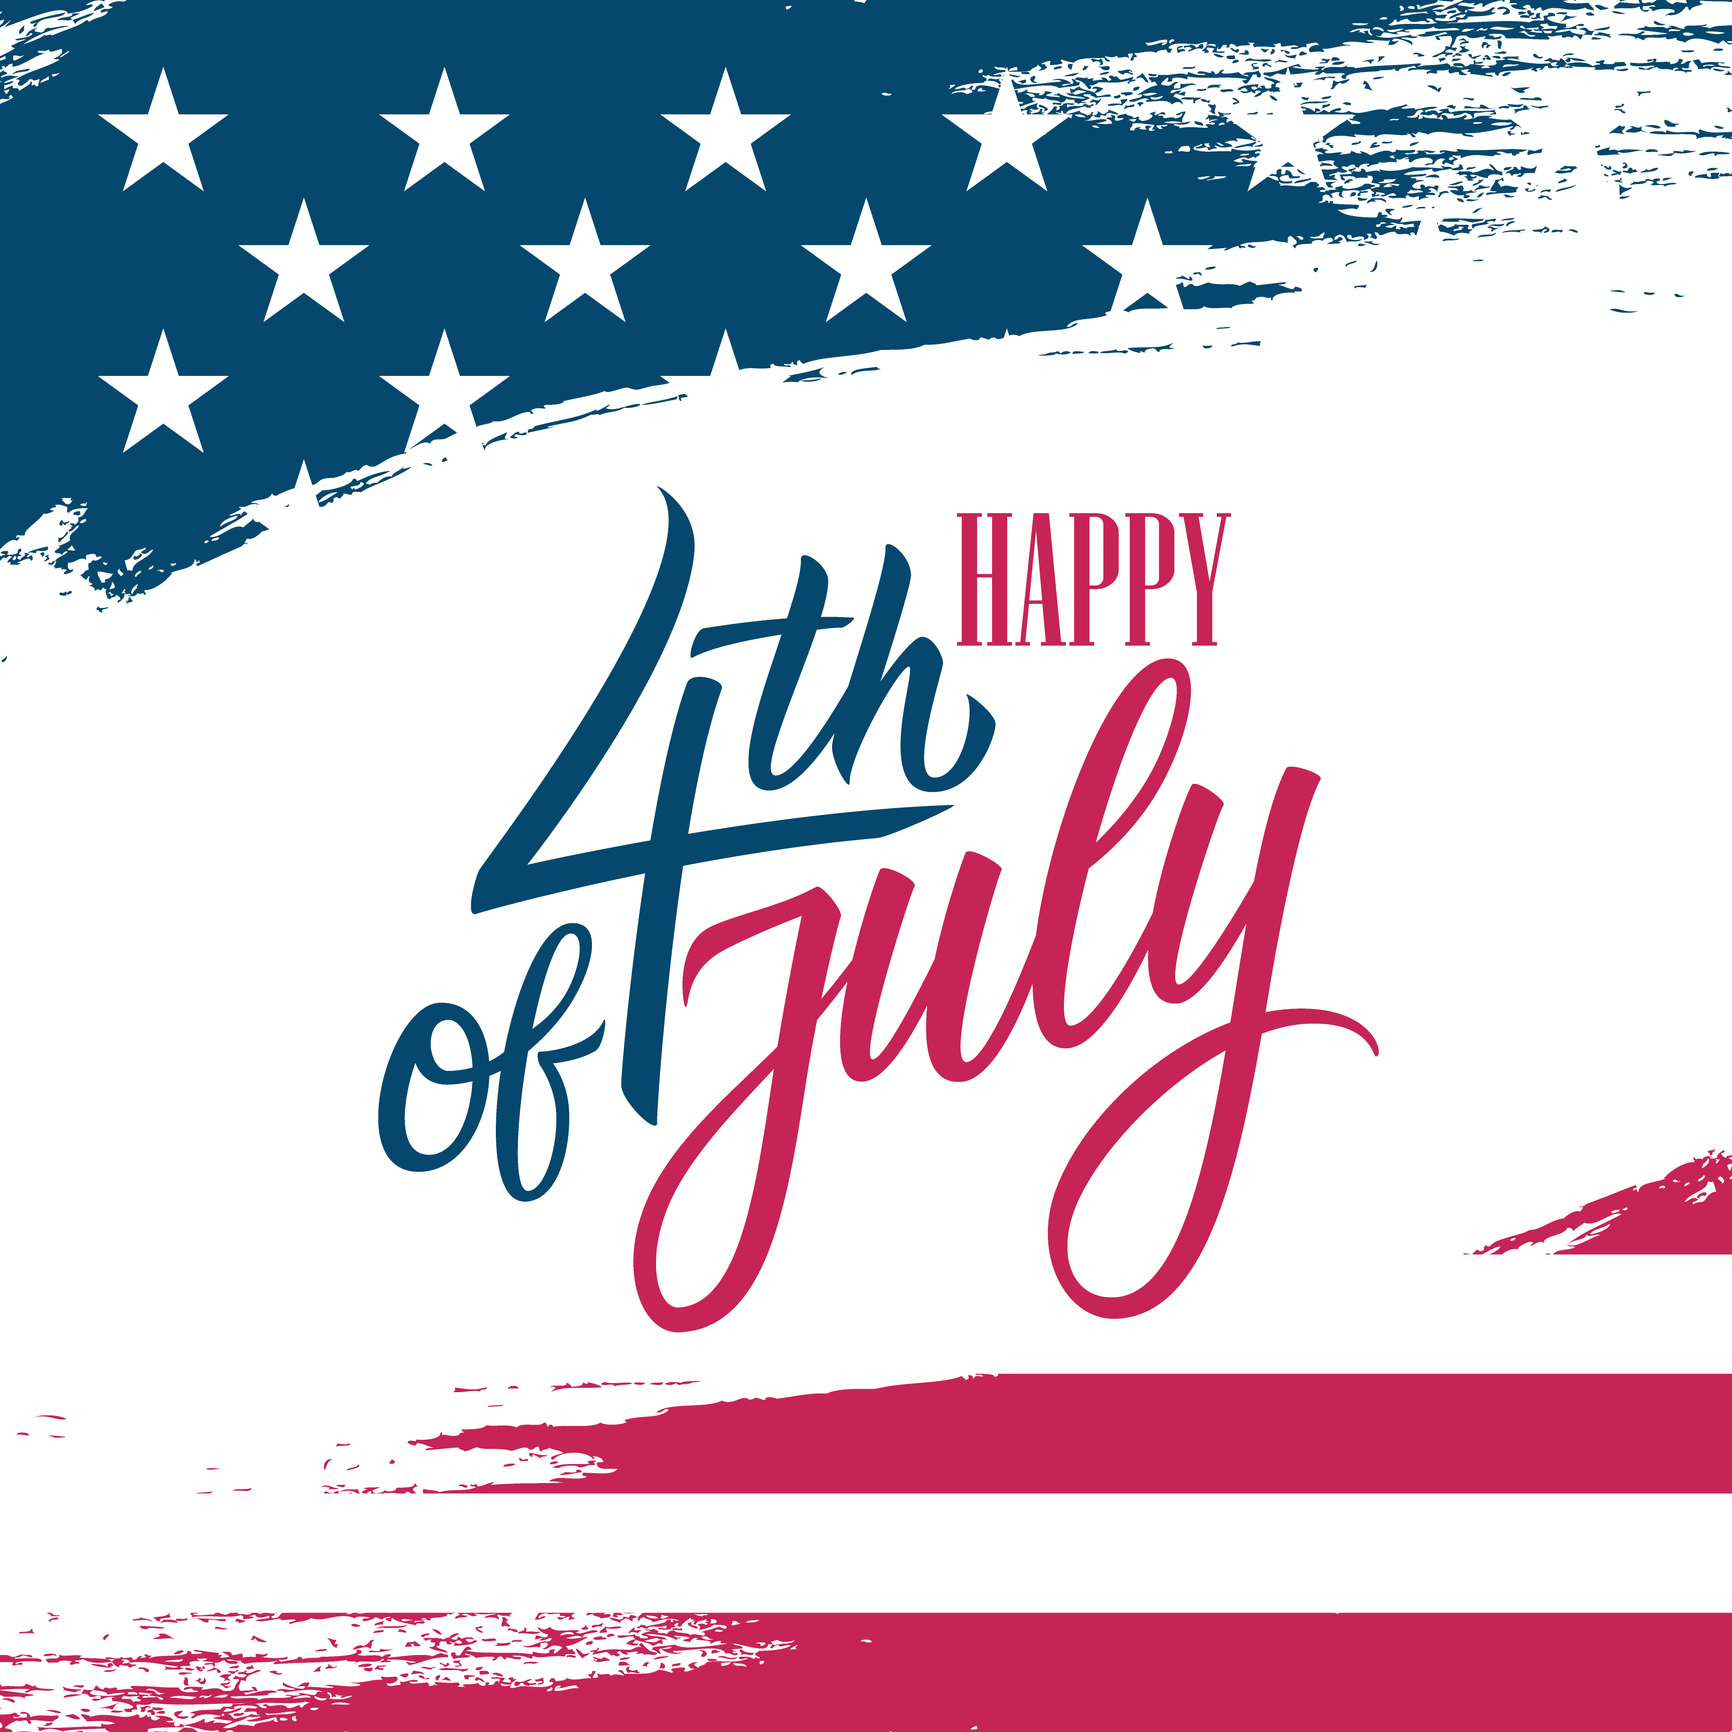 Celebrate 4th of July on Hilton Head Island on your Next Vacation